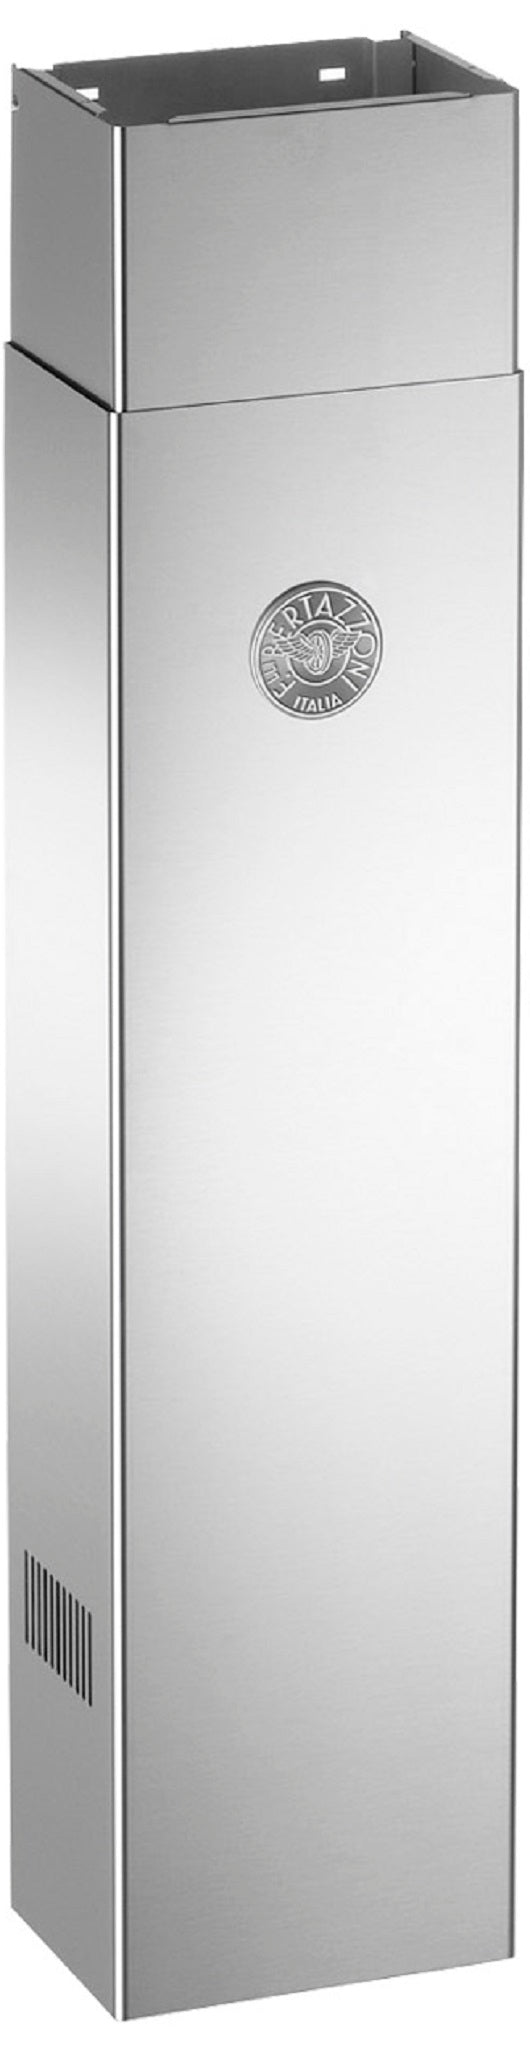 BERTAZZONI 901262 narrow duct cover for ku hoods in Stainless Steel